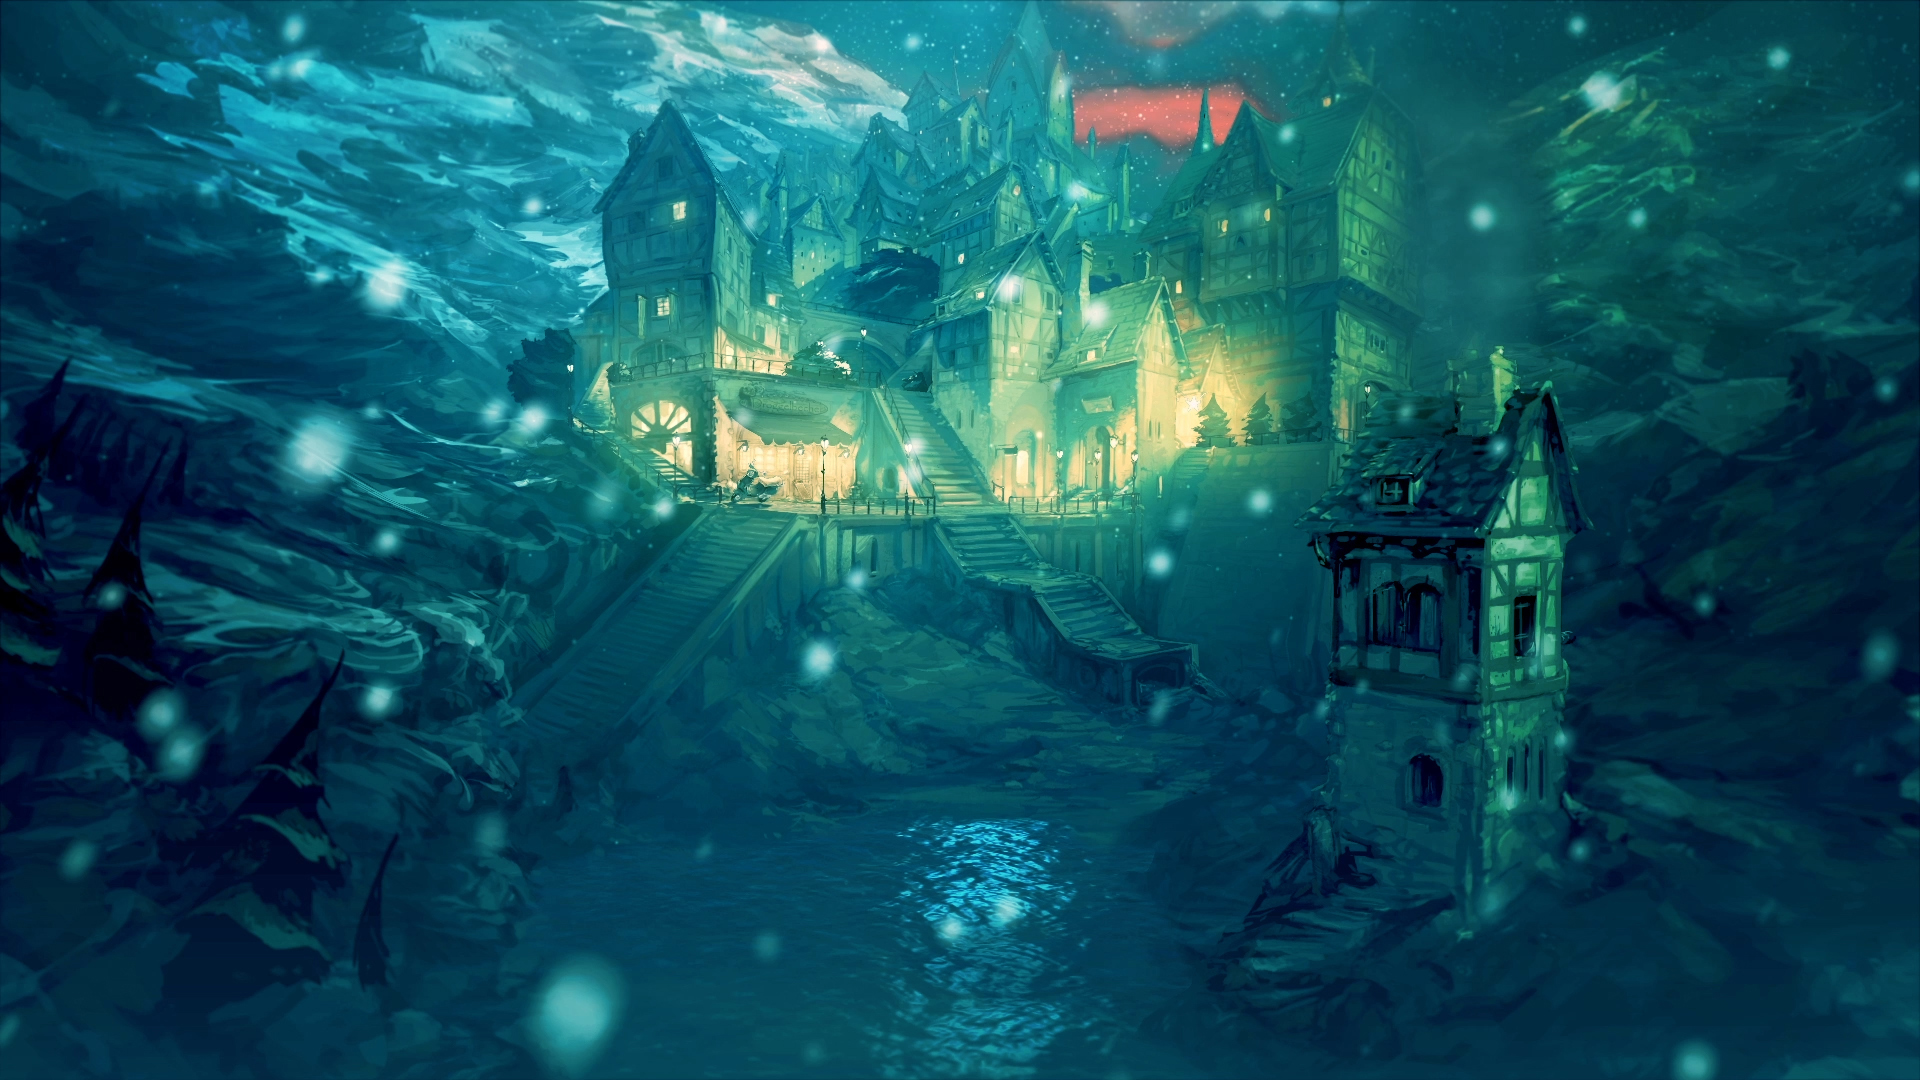 Amazing Silence: The Whispered World 2 Pictures & Backgrounds